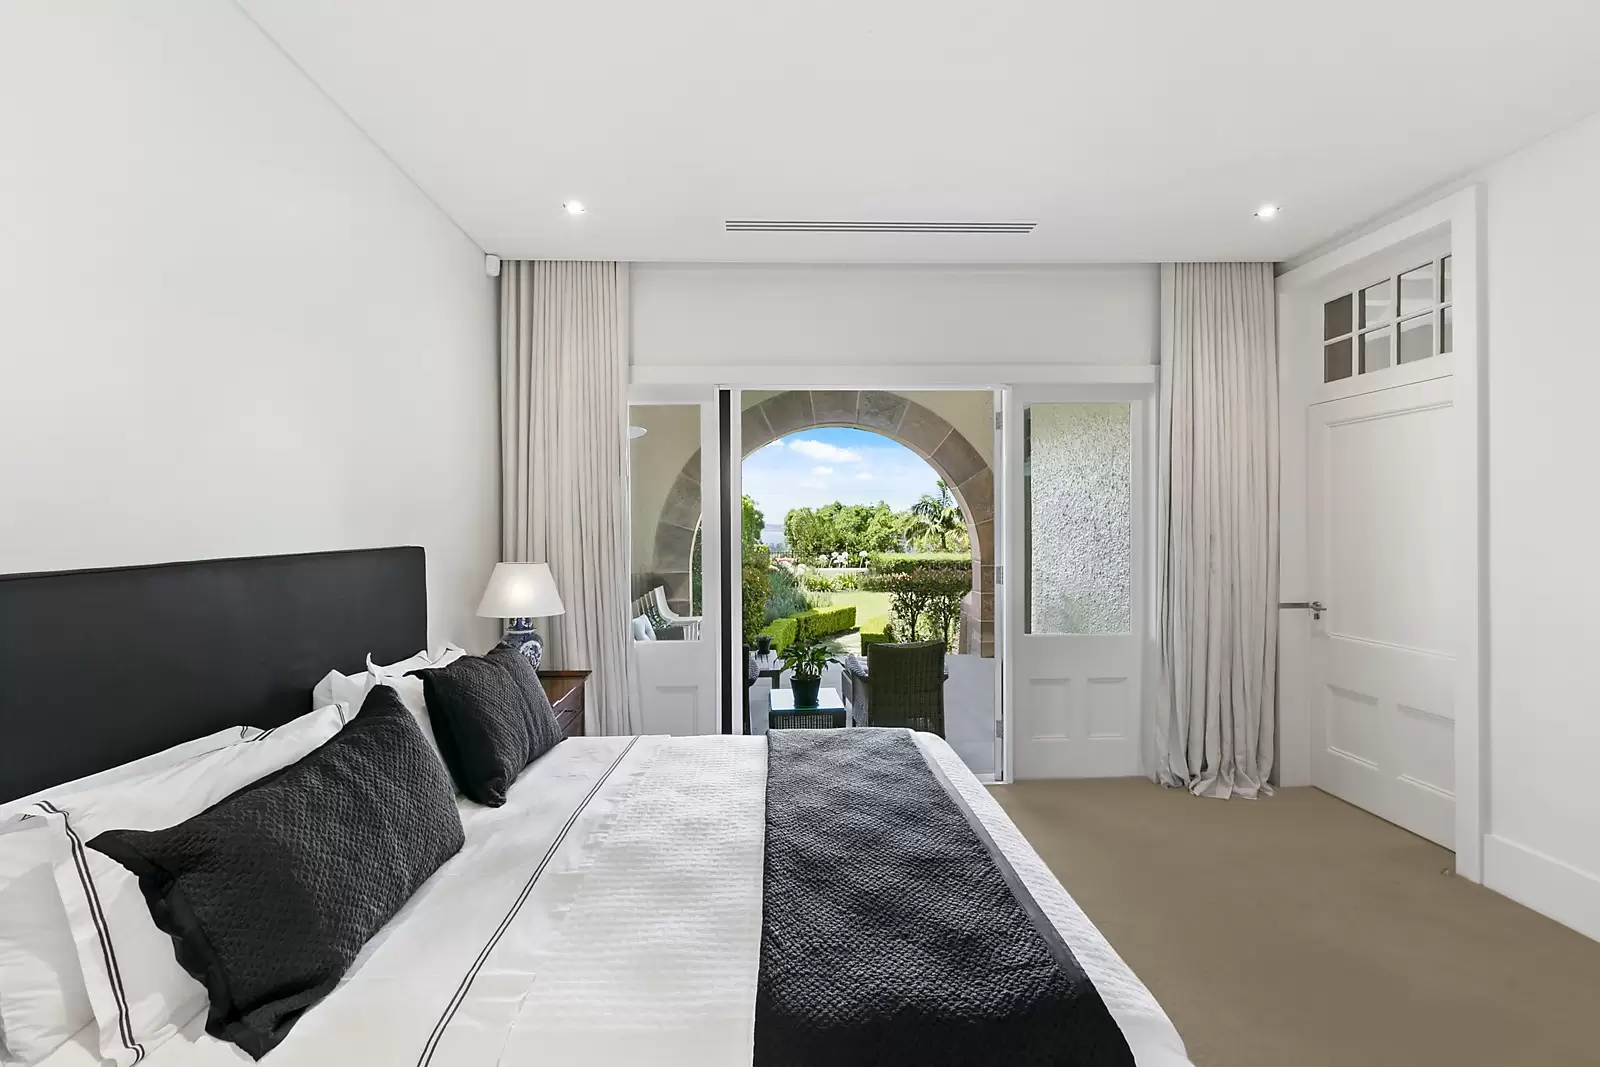 Photo #9: 5/6 Wentworth Street, Point Piper - Sold by Sydney Sotheby's International Realty